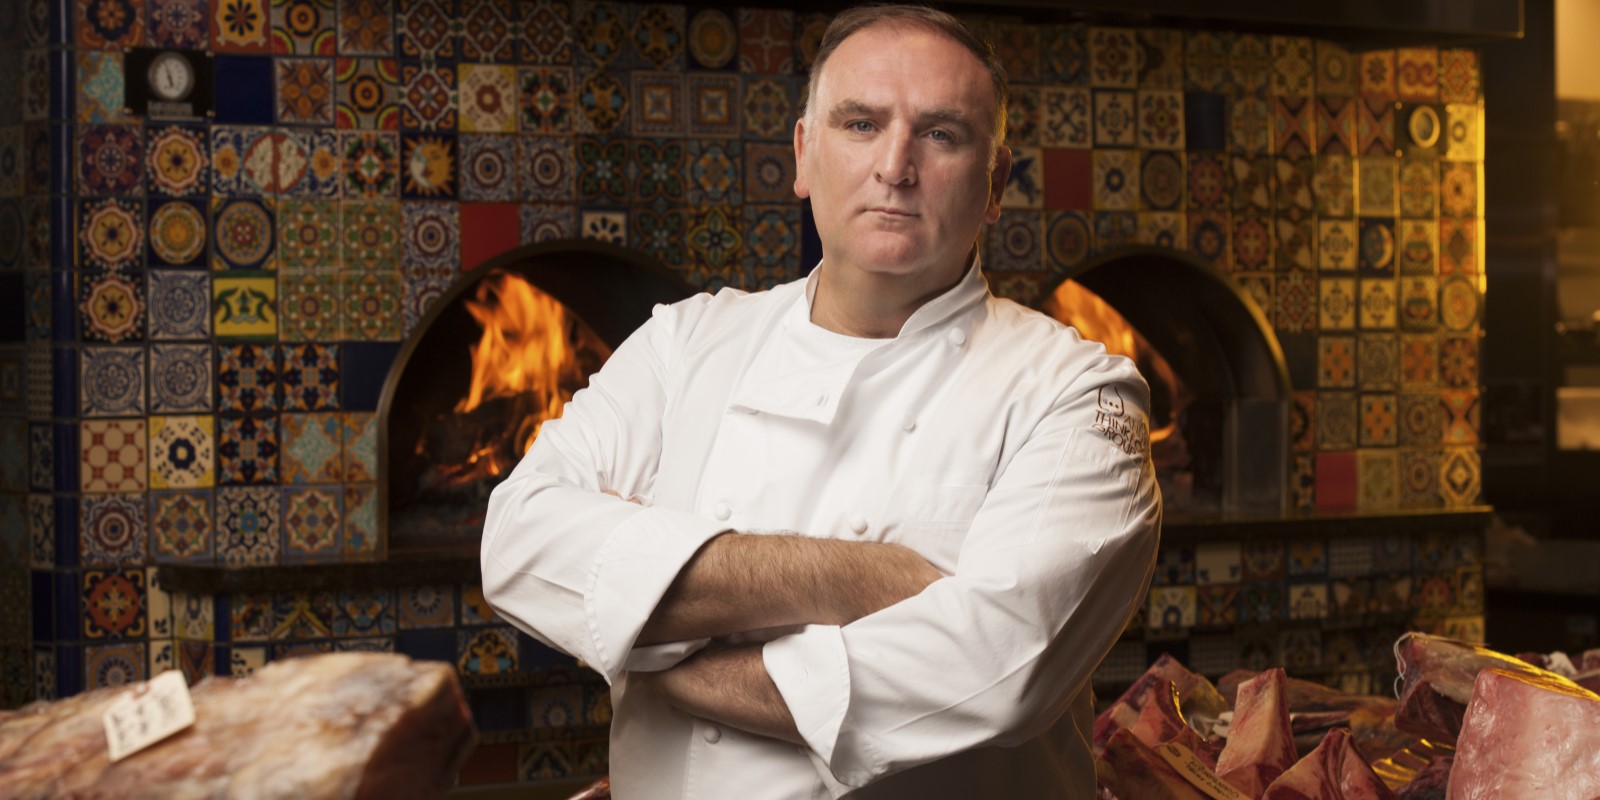 Jose Andres posing with his arms crossed